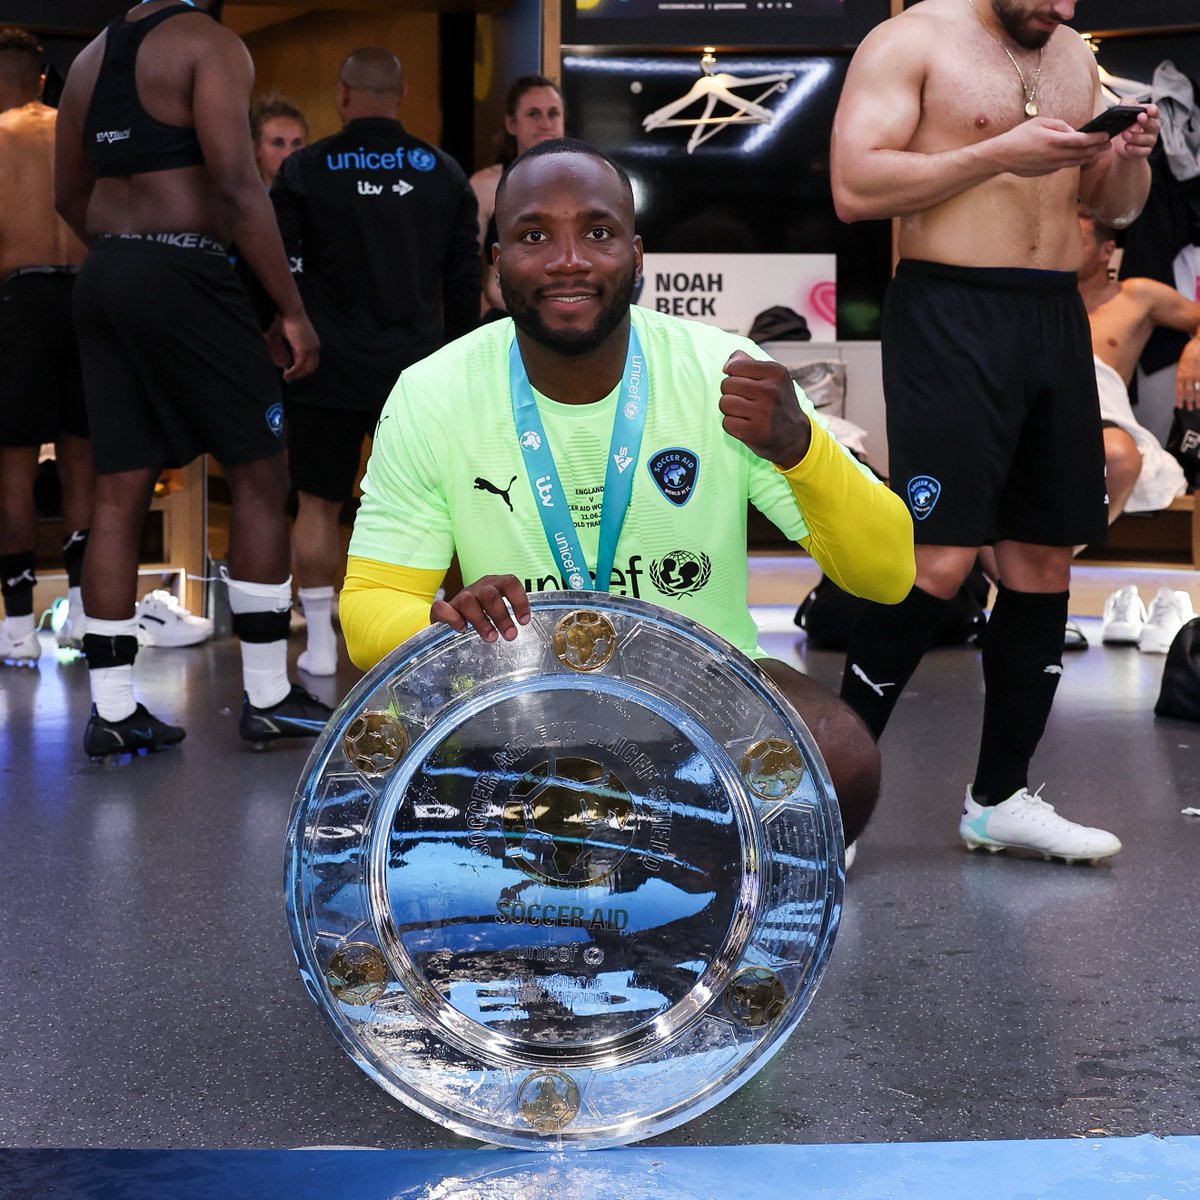 More hardware for the collection! 🏆 @Leon_edwardsmma x @SoccerAid